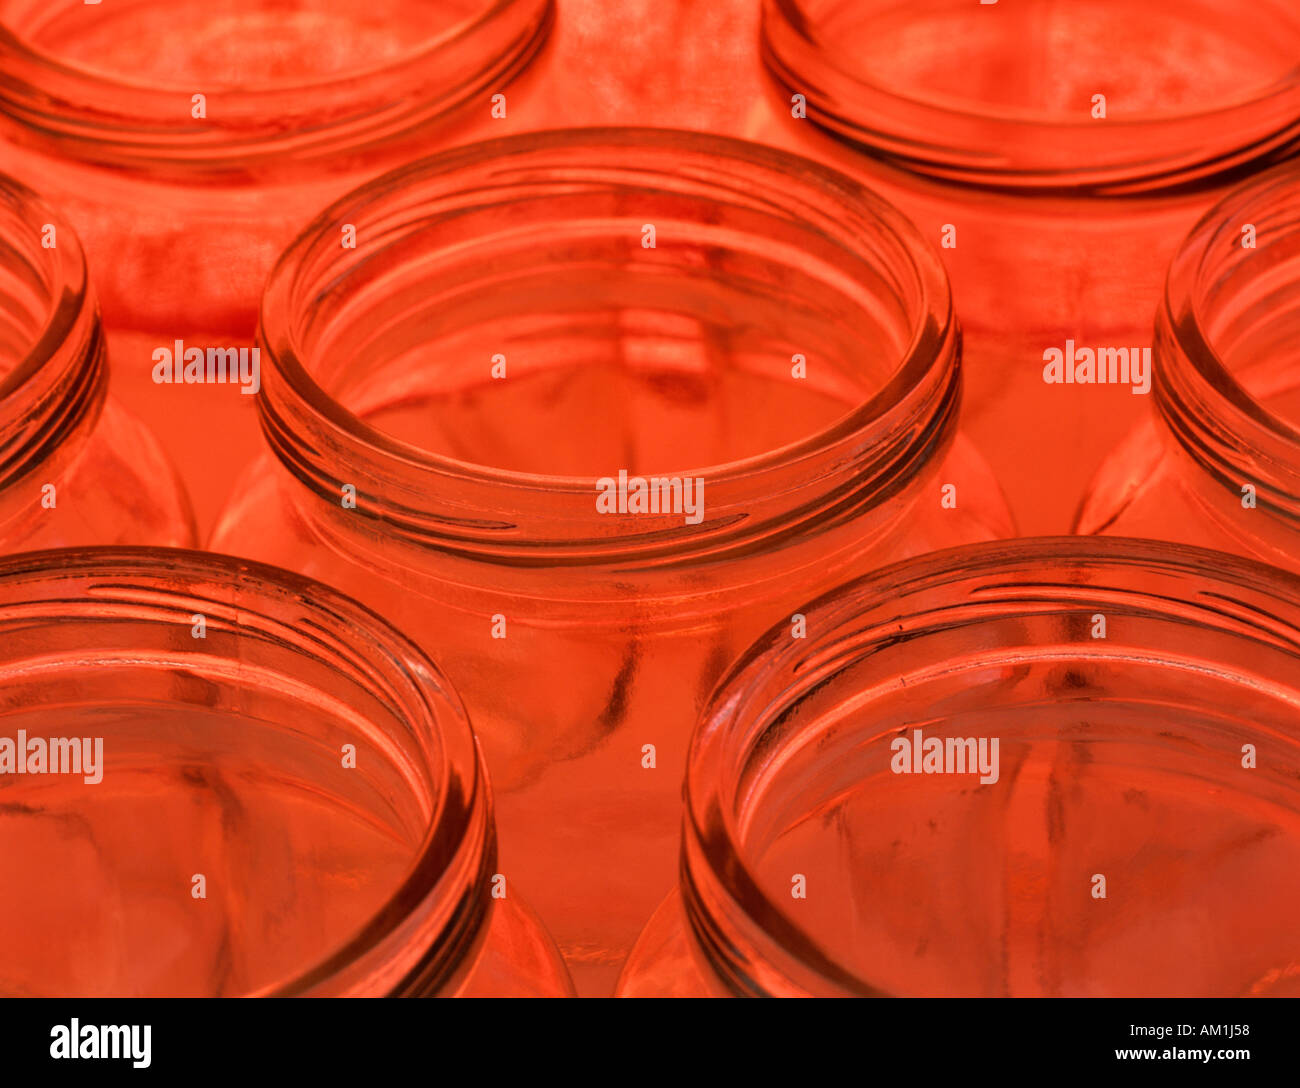 Download Empty Clear Glass Jam Jars With A Hot Orange Background Stock Photo Alamy PSD Mockup Templates